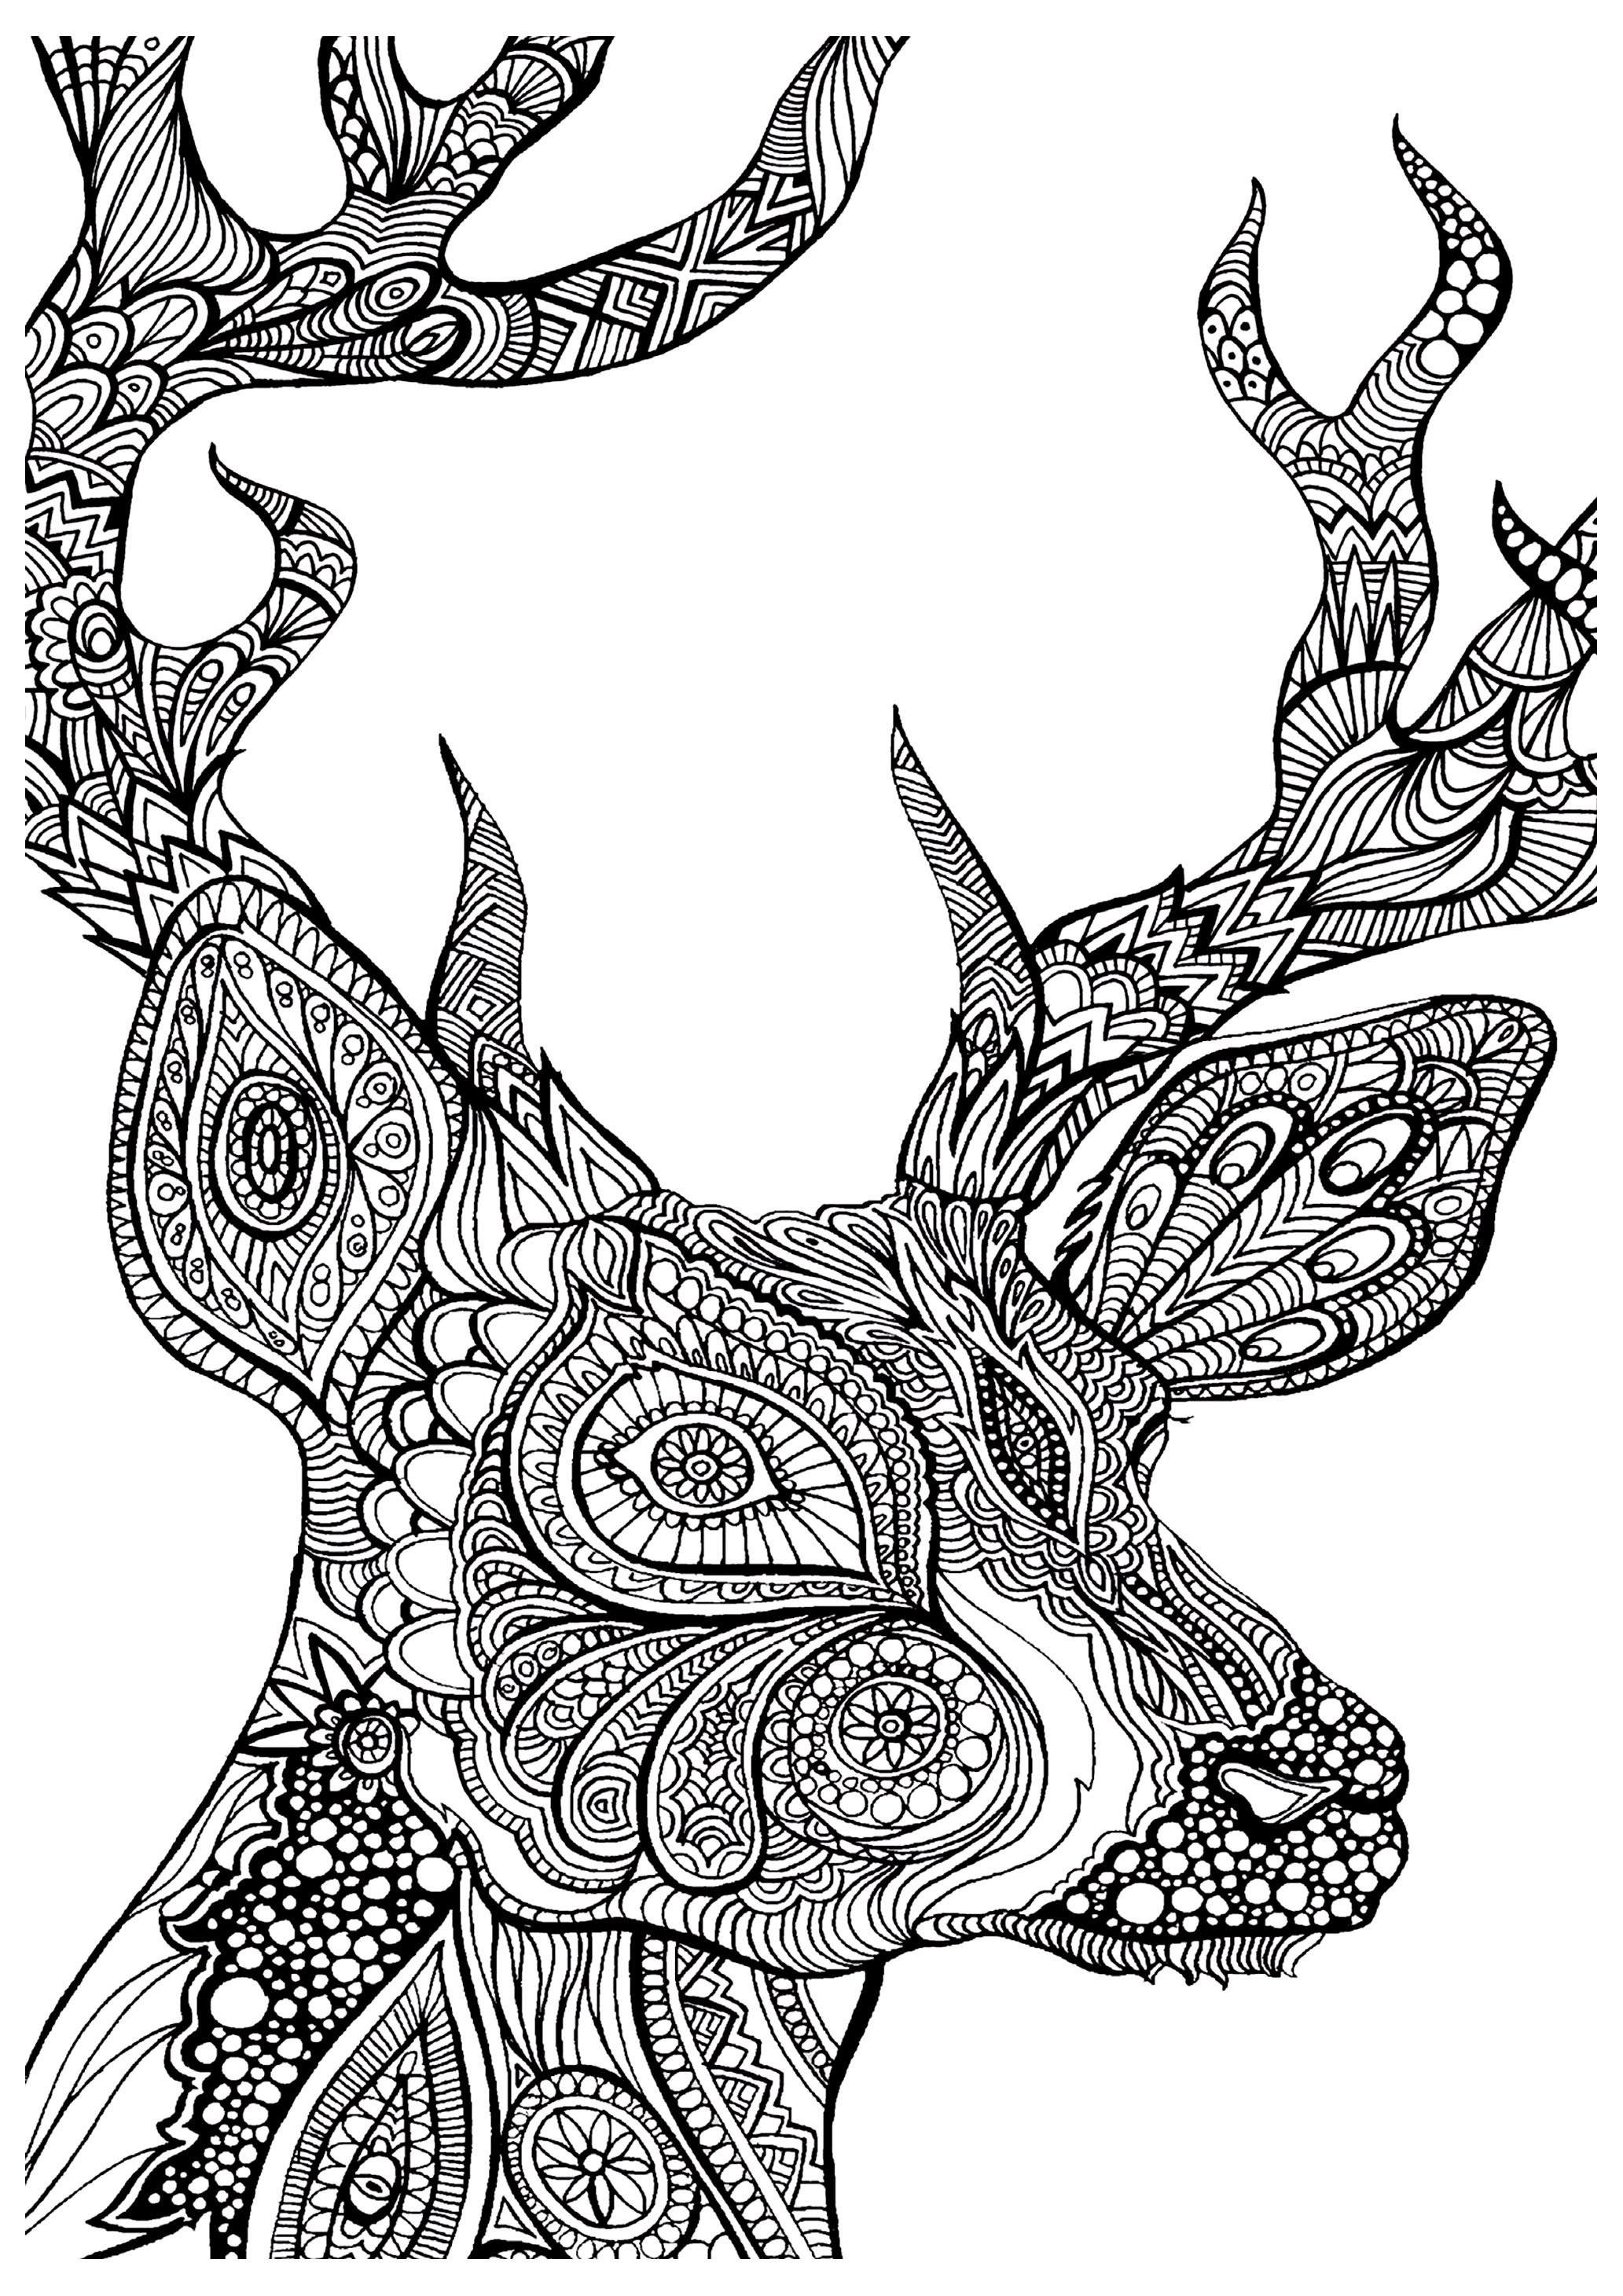 Printable Adult Coloring Pages Free
 19 of the Best Adult Colouring Pages Free Printables for